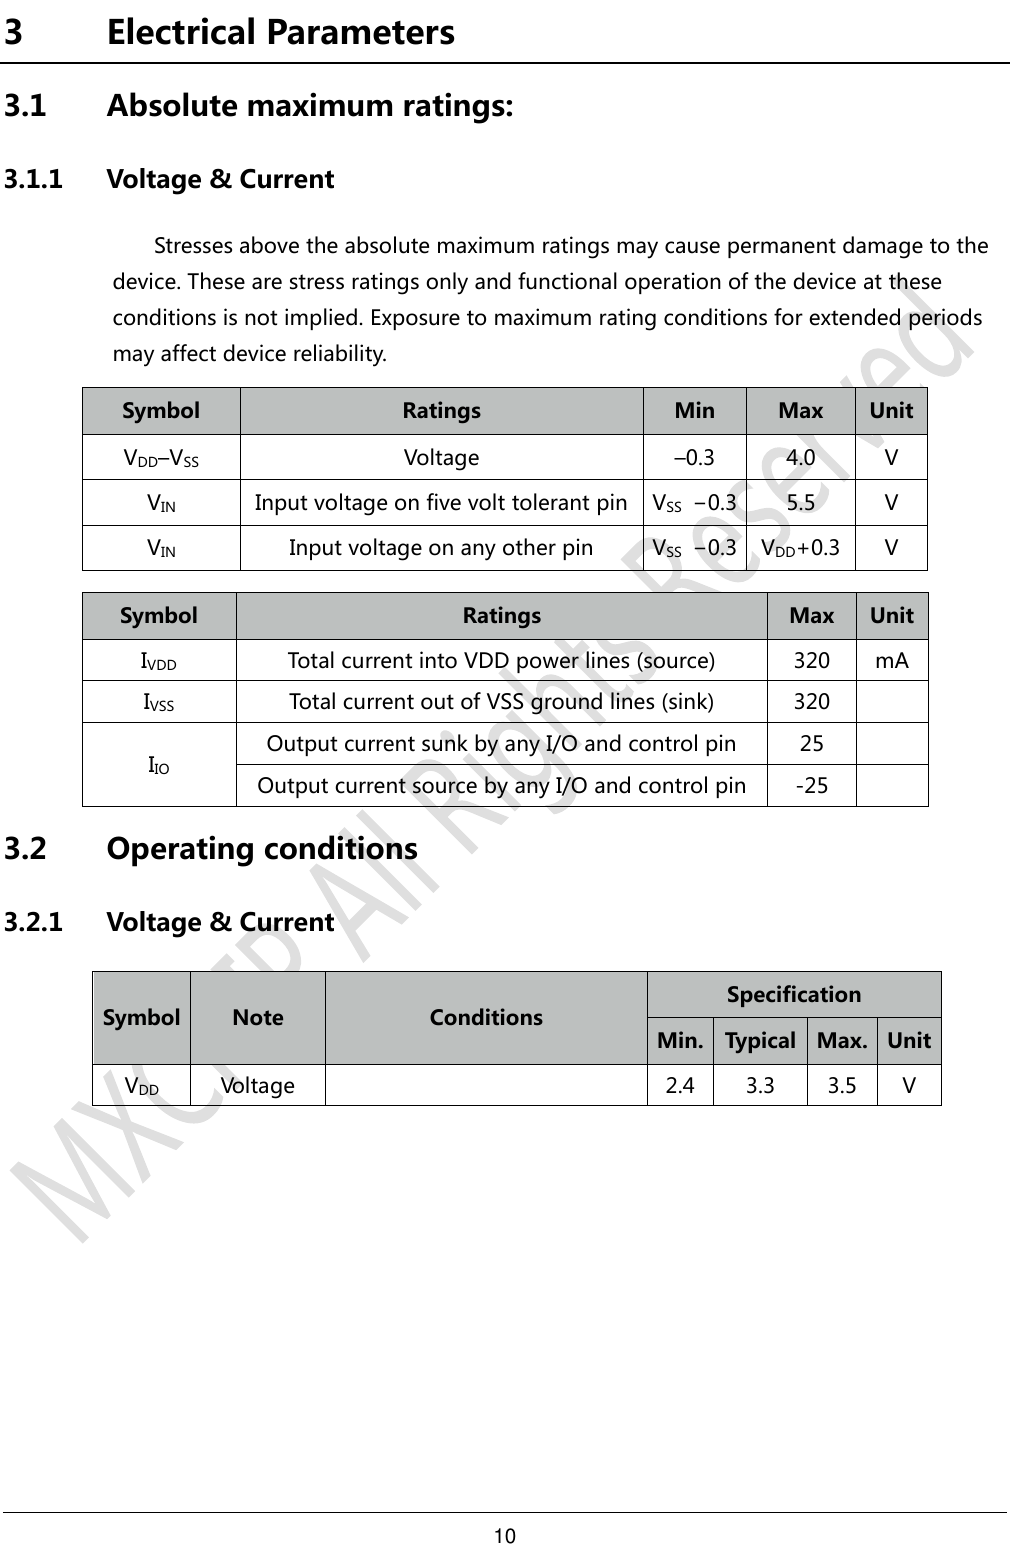 10     3 Electrical Parameters 3.1 Absolute maximum ratings: 3.1.1 Voltage &amp; Current Stresses above the absolute maximum ratings may cause permanent damage to the device. These are stress ratings only and functional operation of the device at these conditions is not implied. Exposure to maximum rating conditions for extended periods may affect device reliability. Symbol Ratings Min Max Unit VDD–VSS Voltage –0.3 4.0 V VIN Input voltage on five volt tolerant pin VSS −0.3 5.5 V VIN Input voltage on any other pin VSS −0.3 VDD+0.3 V  Symbol Ratings Max Unit IVDD Total current into VDD power lines (source) 320 mA IVSS Total current out of VSS ground lines (sink) 320  IIO Output current sunk by any I/O and control pin 25  Output current source by any I/O and control pin -25  3.2 Operating conditions 3.2.1 Voltage &amp; Current Symbol Note Conditions Specification Min. Typical Max. Unit VDD Voltage  2.4 3.3 3.5 V    